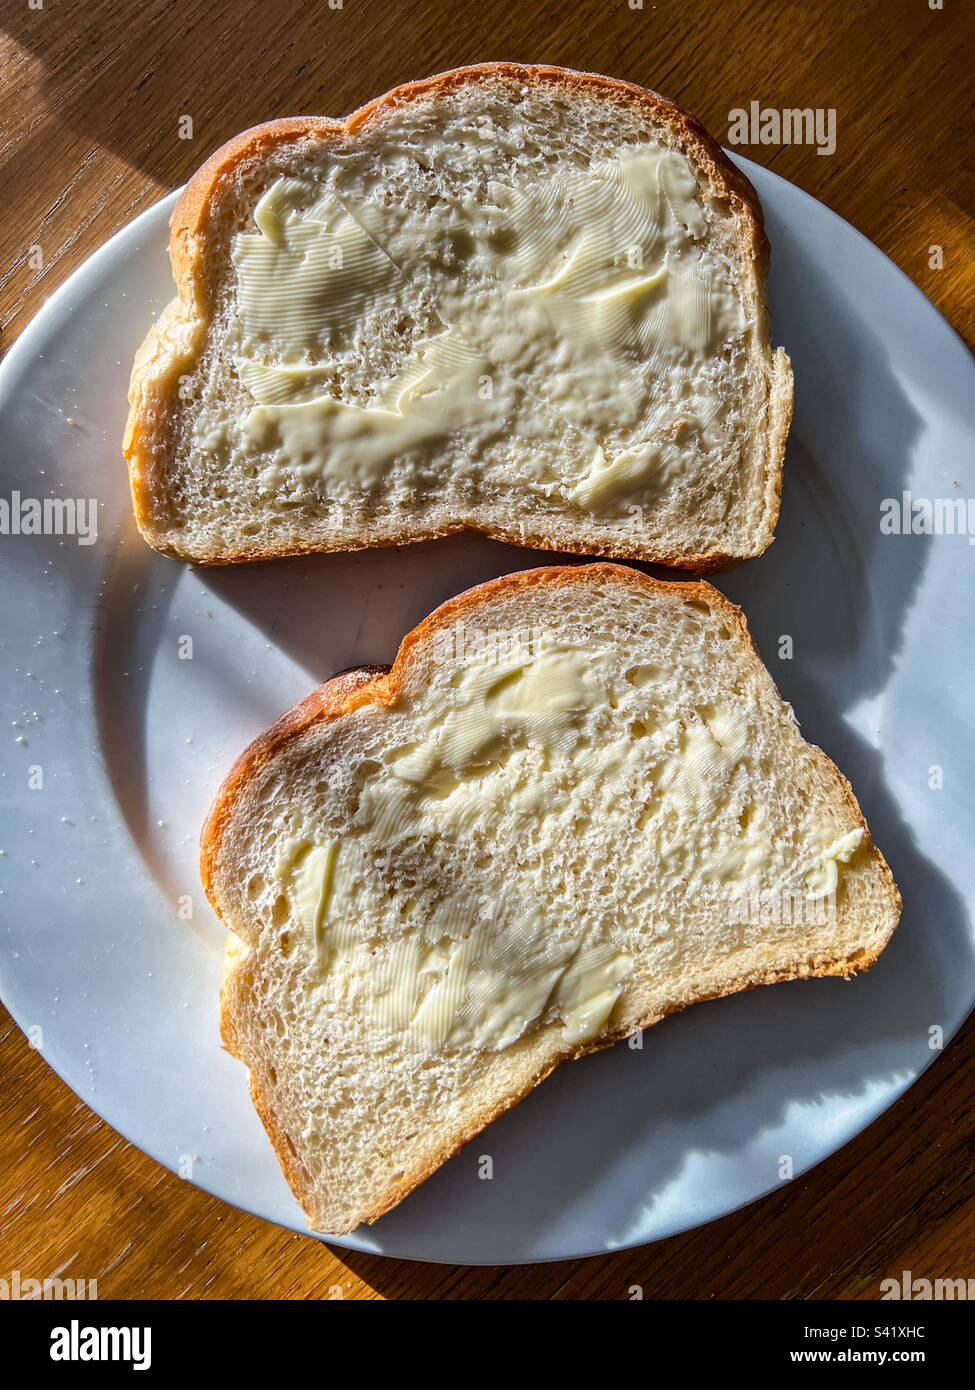 https://c8.alamy.com/comp/S41XHC/two-slices-of-buttered-white-sliced-bread-on-white-plate-S41XHC.jpg